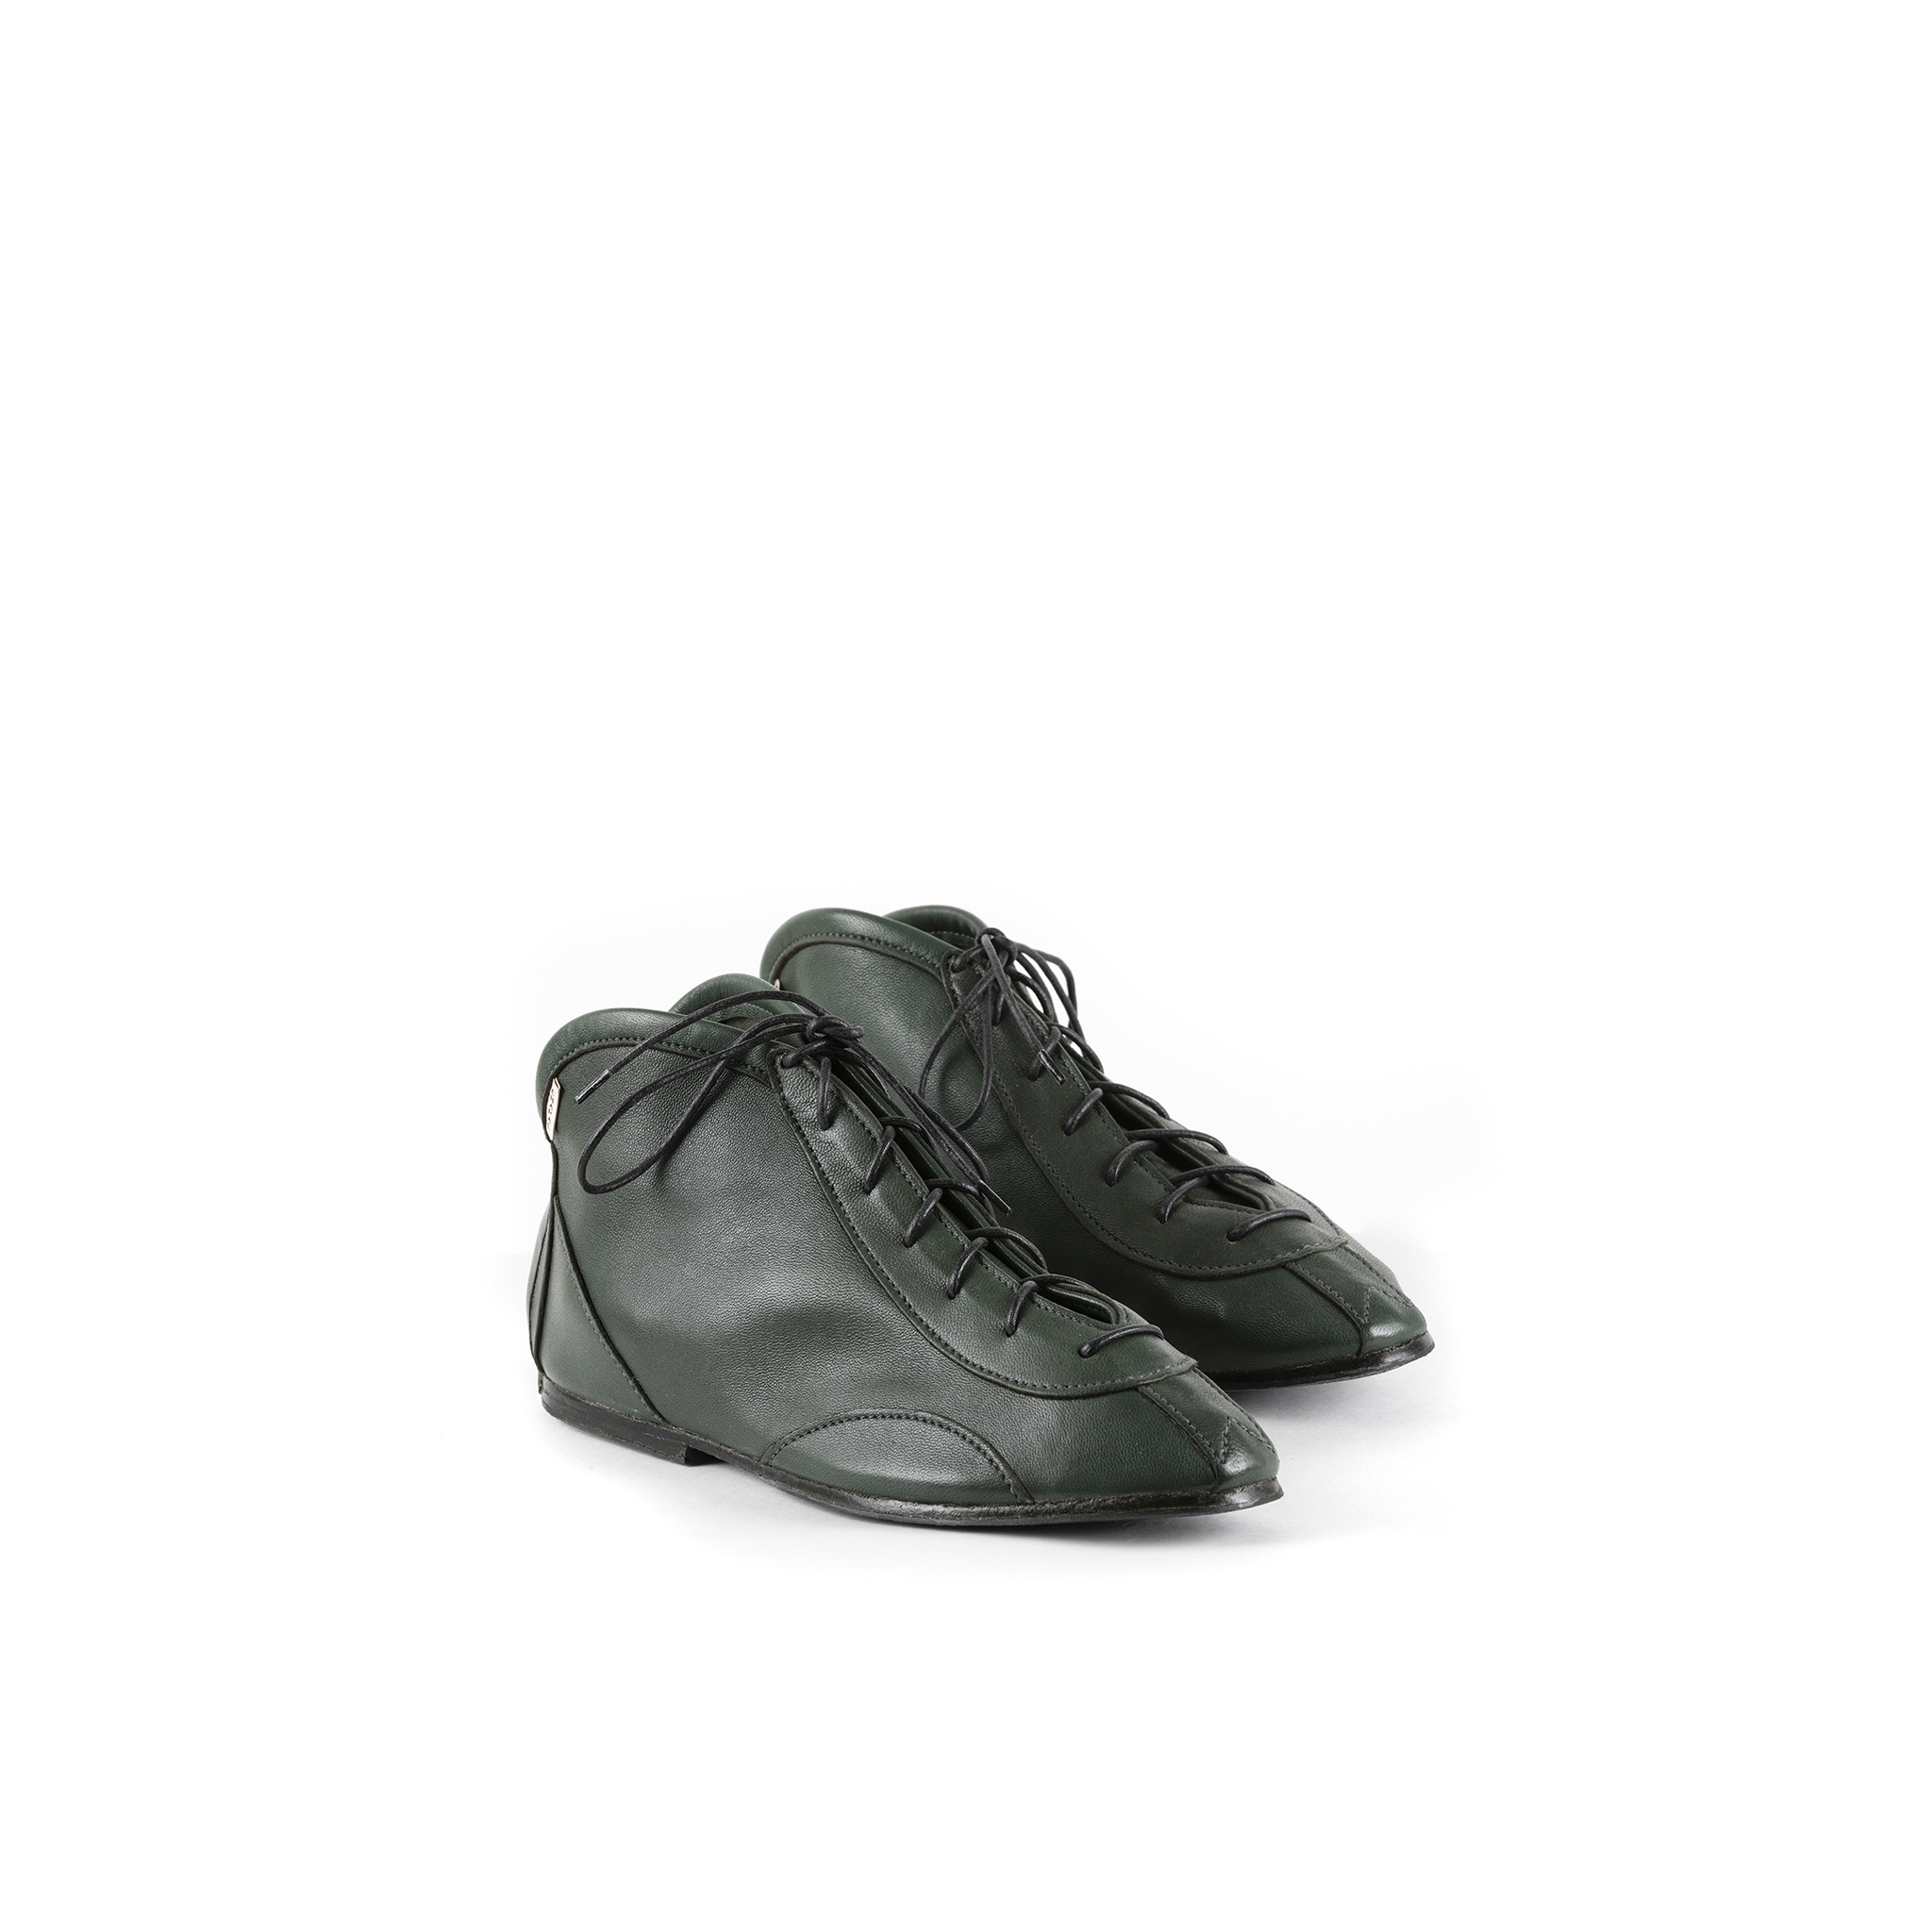 Pilot 60's Shoes - Glossy leather - Green color